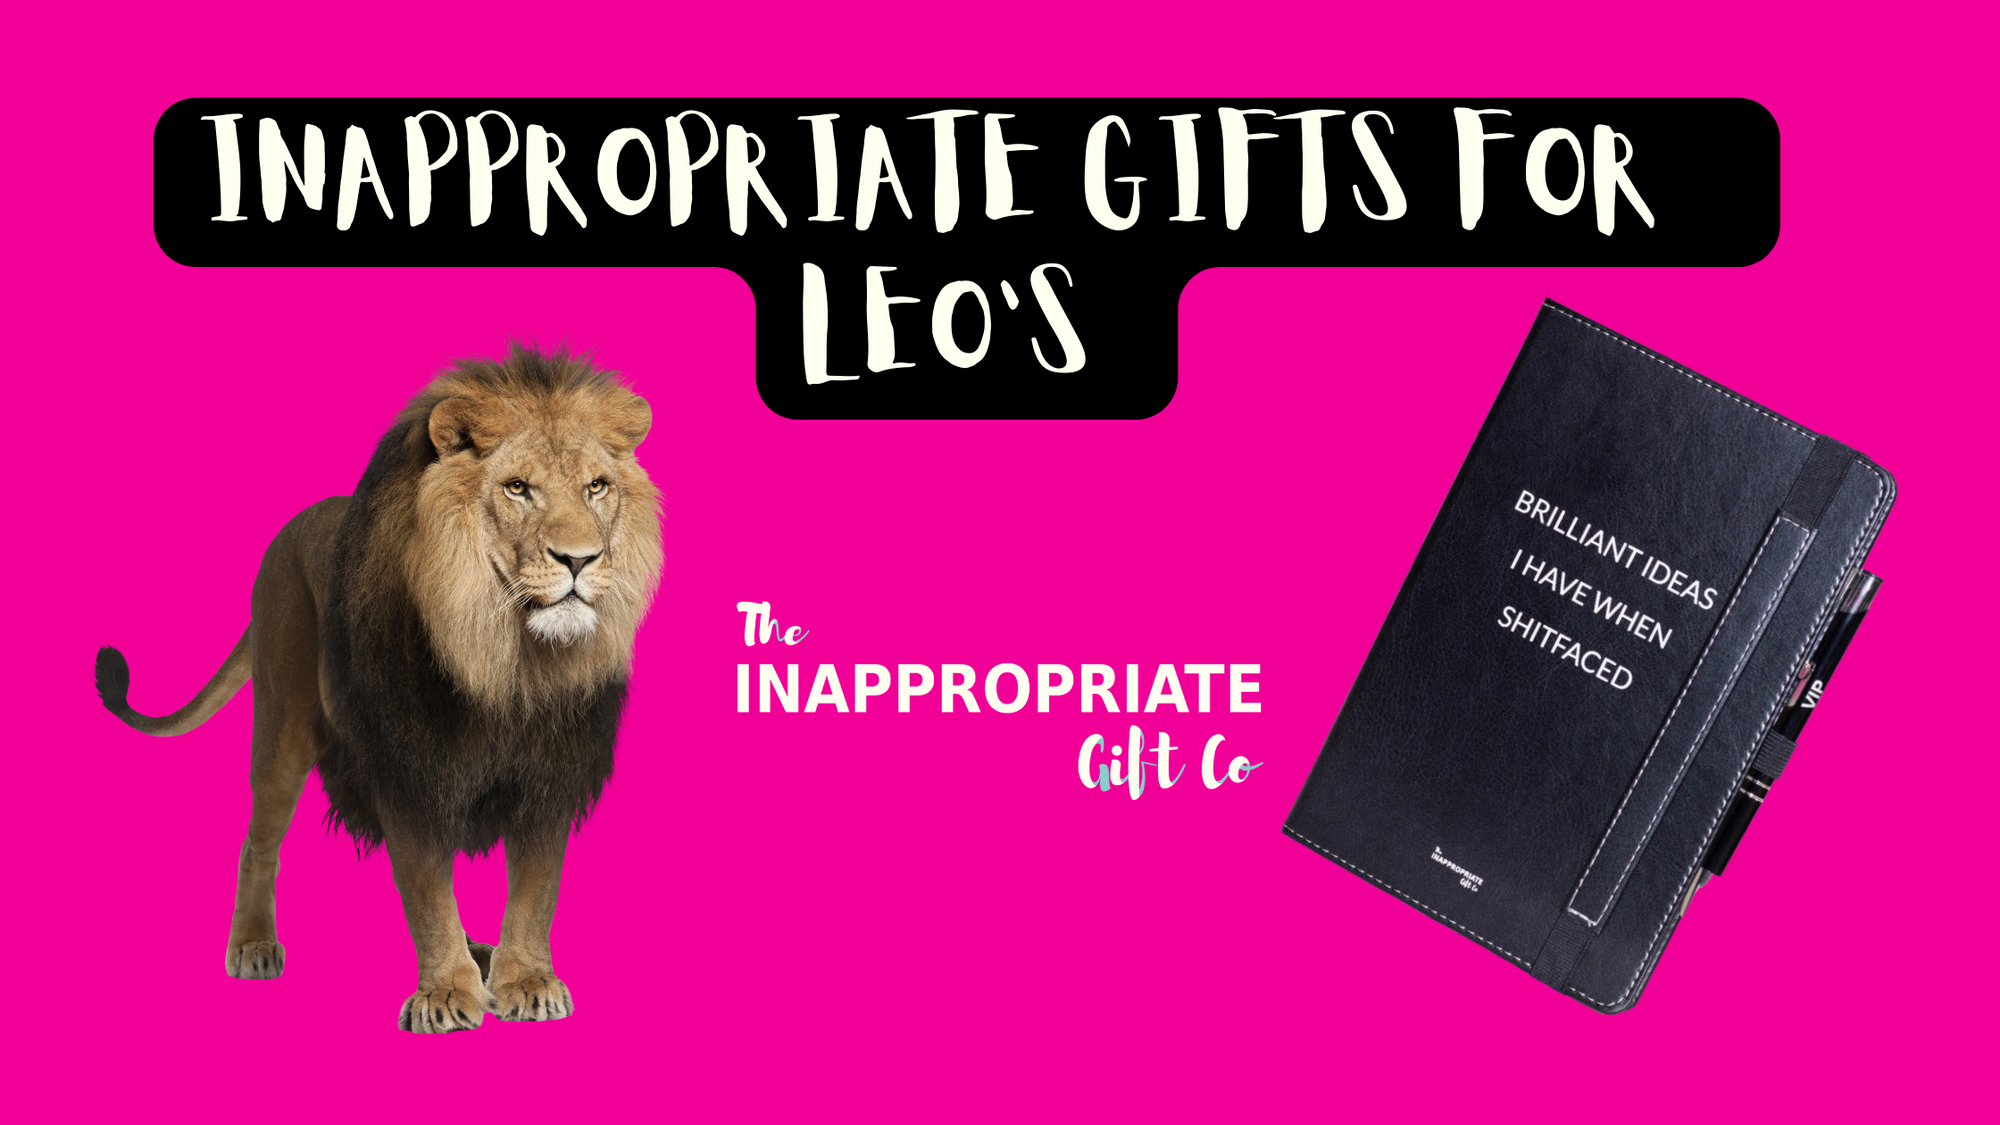 Inappropriate GIfts For A LEO